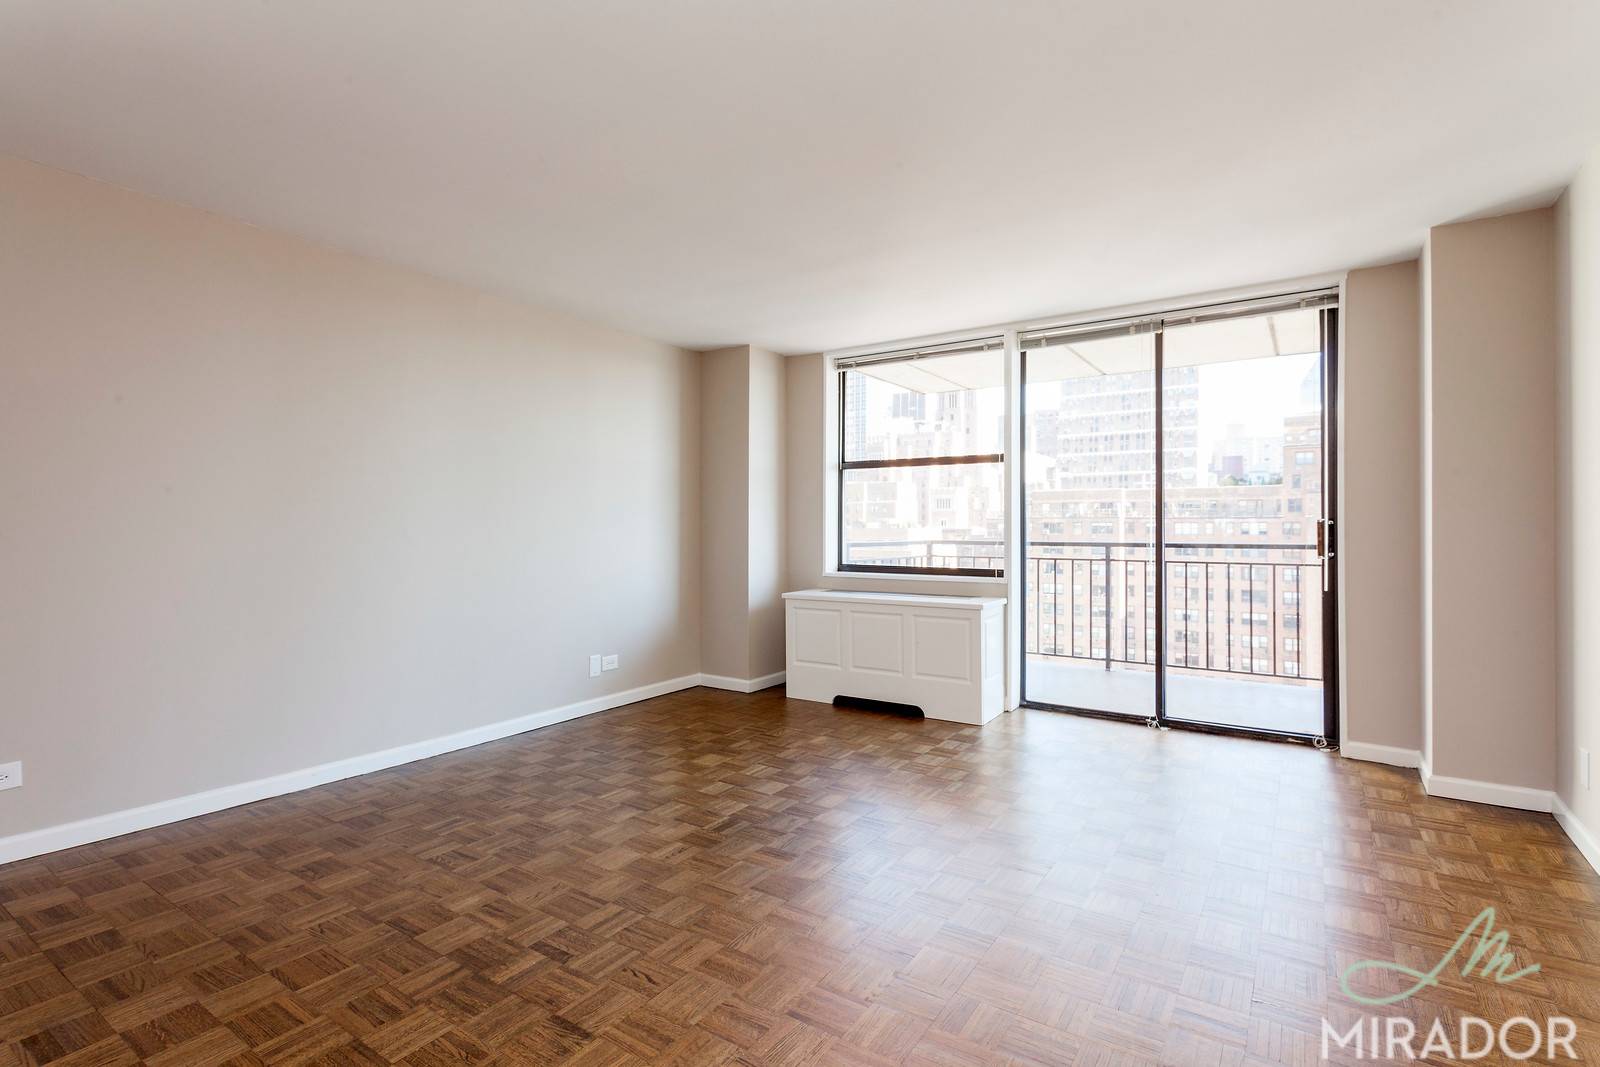 Stunning gut renovated north facing 2 bedroom with a private balcony and water views at New York Tower.